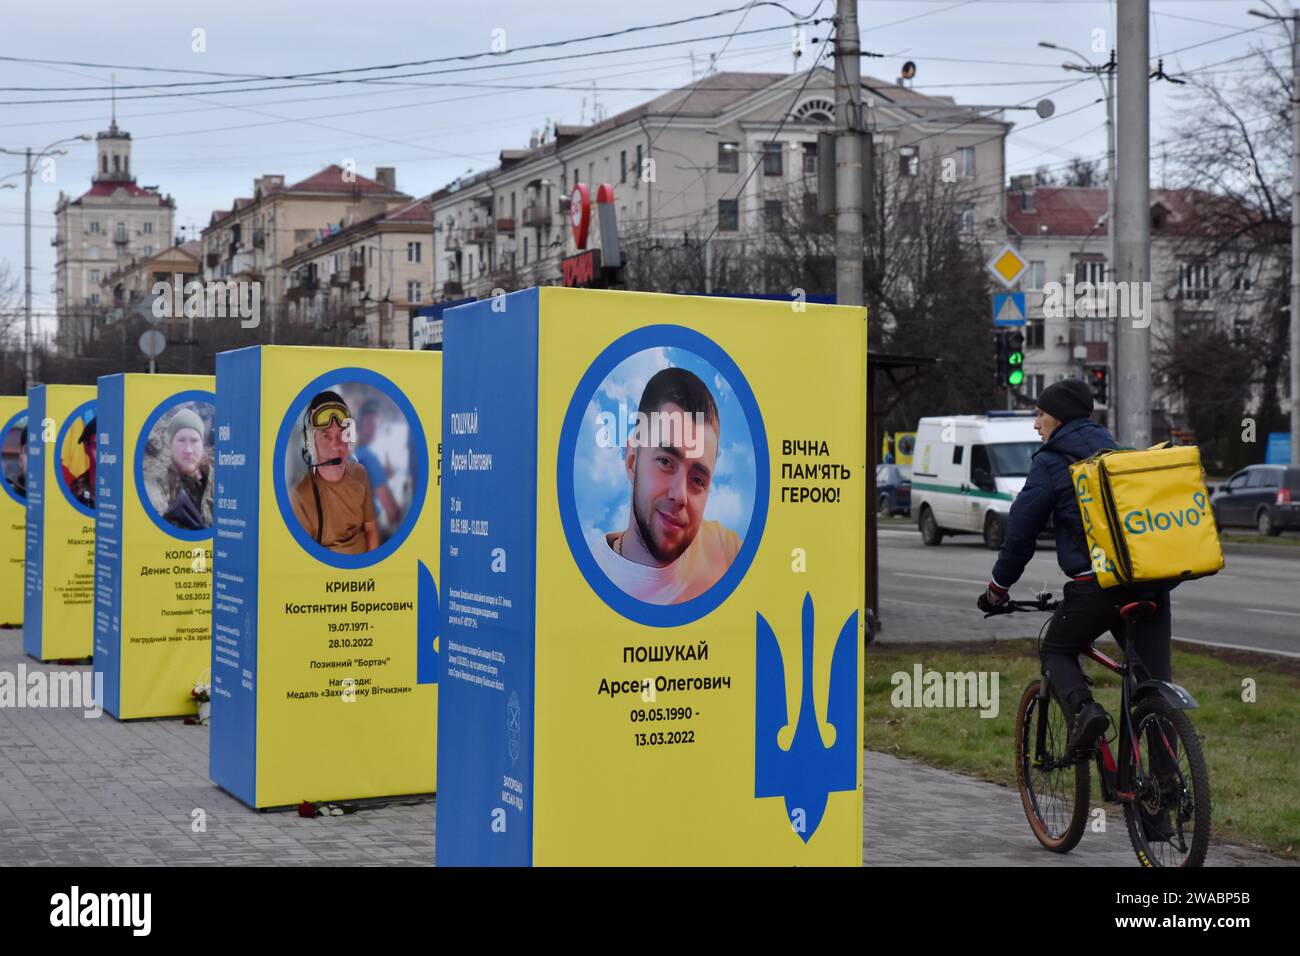 A man from delivery service rides a bicycle past stands of portraits of fallen Ukrainian soldiers in the center of Zaporizhzhia. Ukrainian President Volodymyr Zelenskiy said Russian forces are suffering heavy losses and the notion that Moscow is winning the nearly two-year-old war is only a 'feeling' not based on reality. There was no response to a request for comment from Russian officials on Zelenskiy's remarks. Russian officials have said Western estimates of Russian death tolls are vastly exaggerated and almost always underestimate Ukrainian losses. Stock Photo